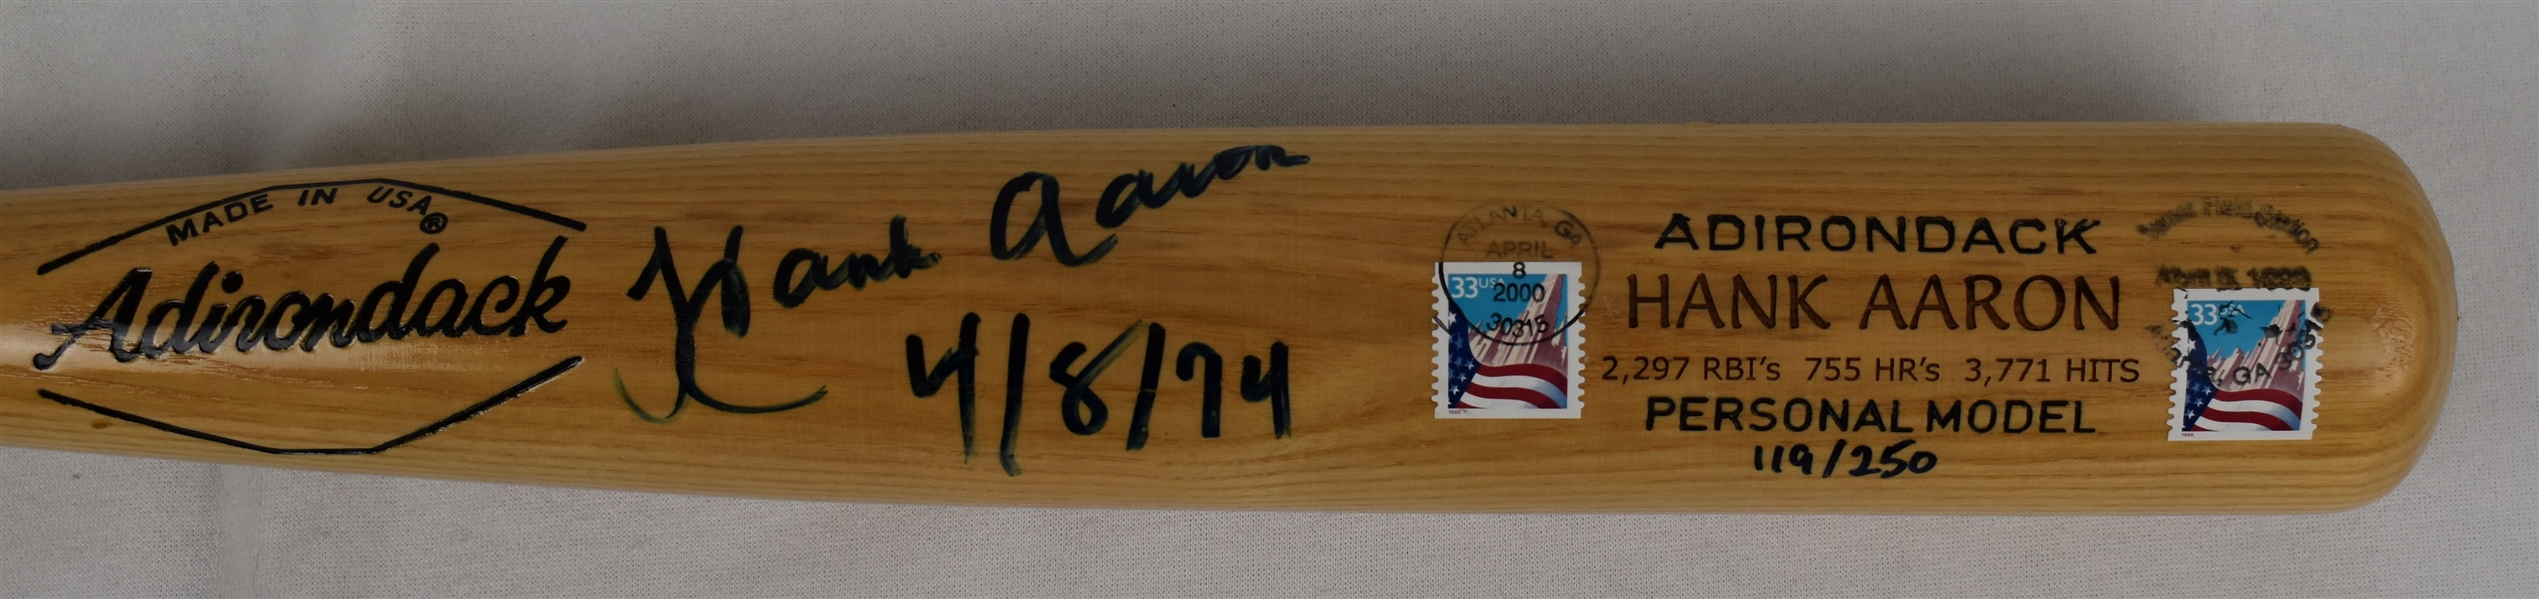 Hank Aaron Autographed Inscribed 4/8/74 Limited Edition Stamped Bat